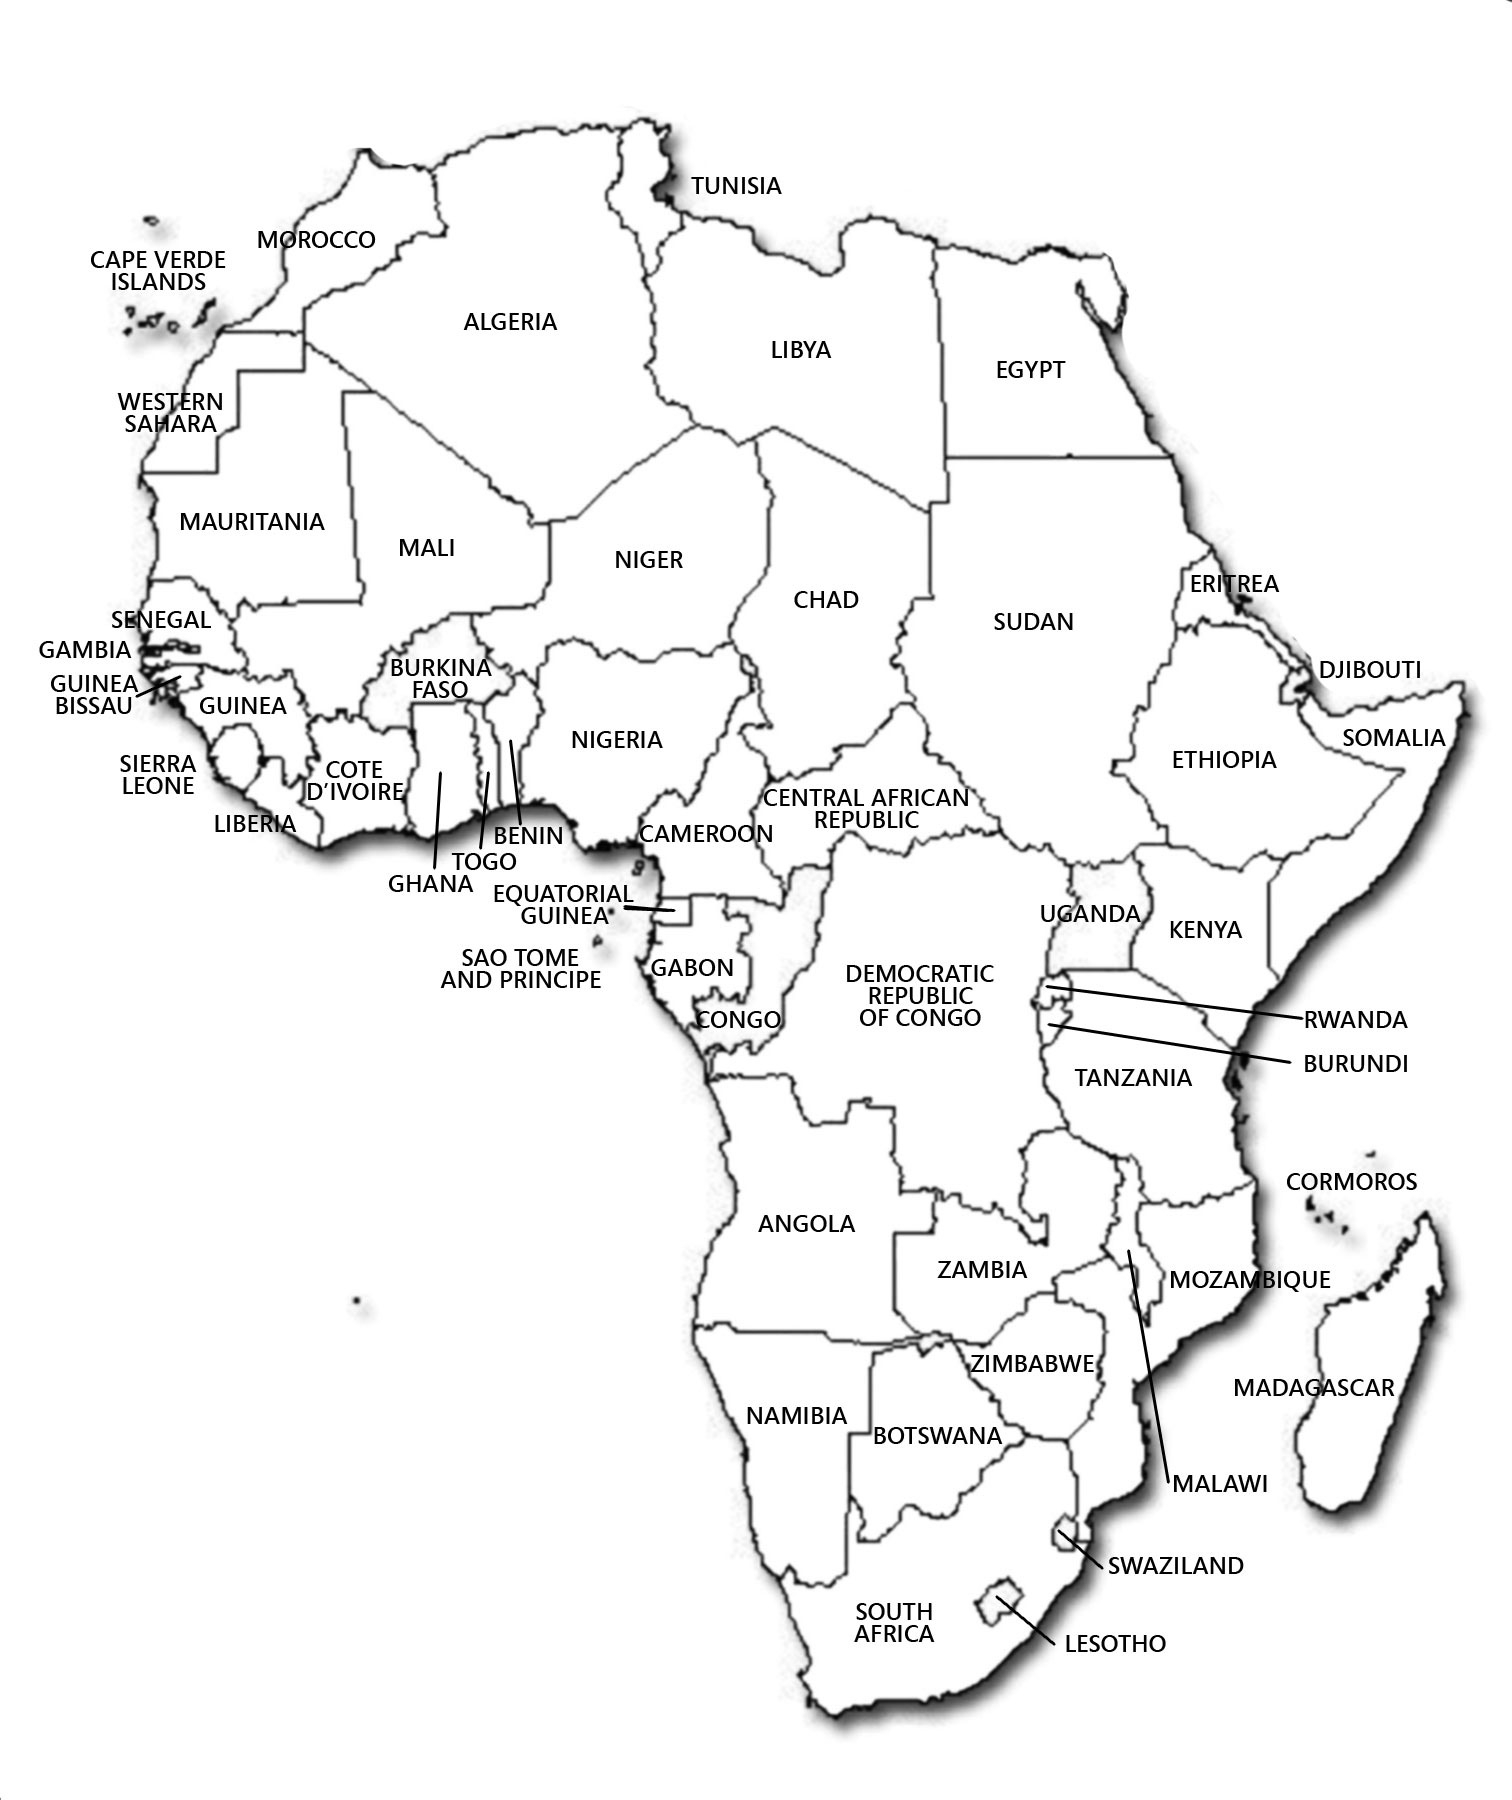 Maps Of Africa And African Countries Political Maps 